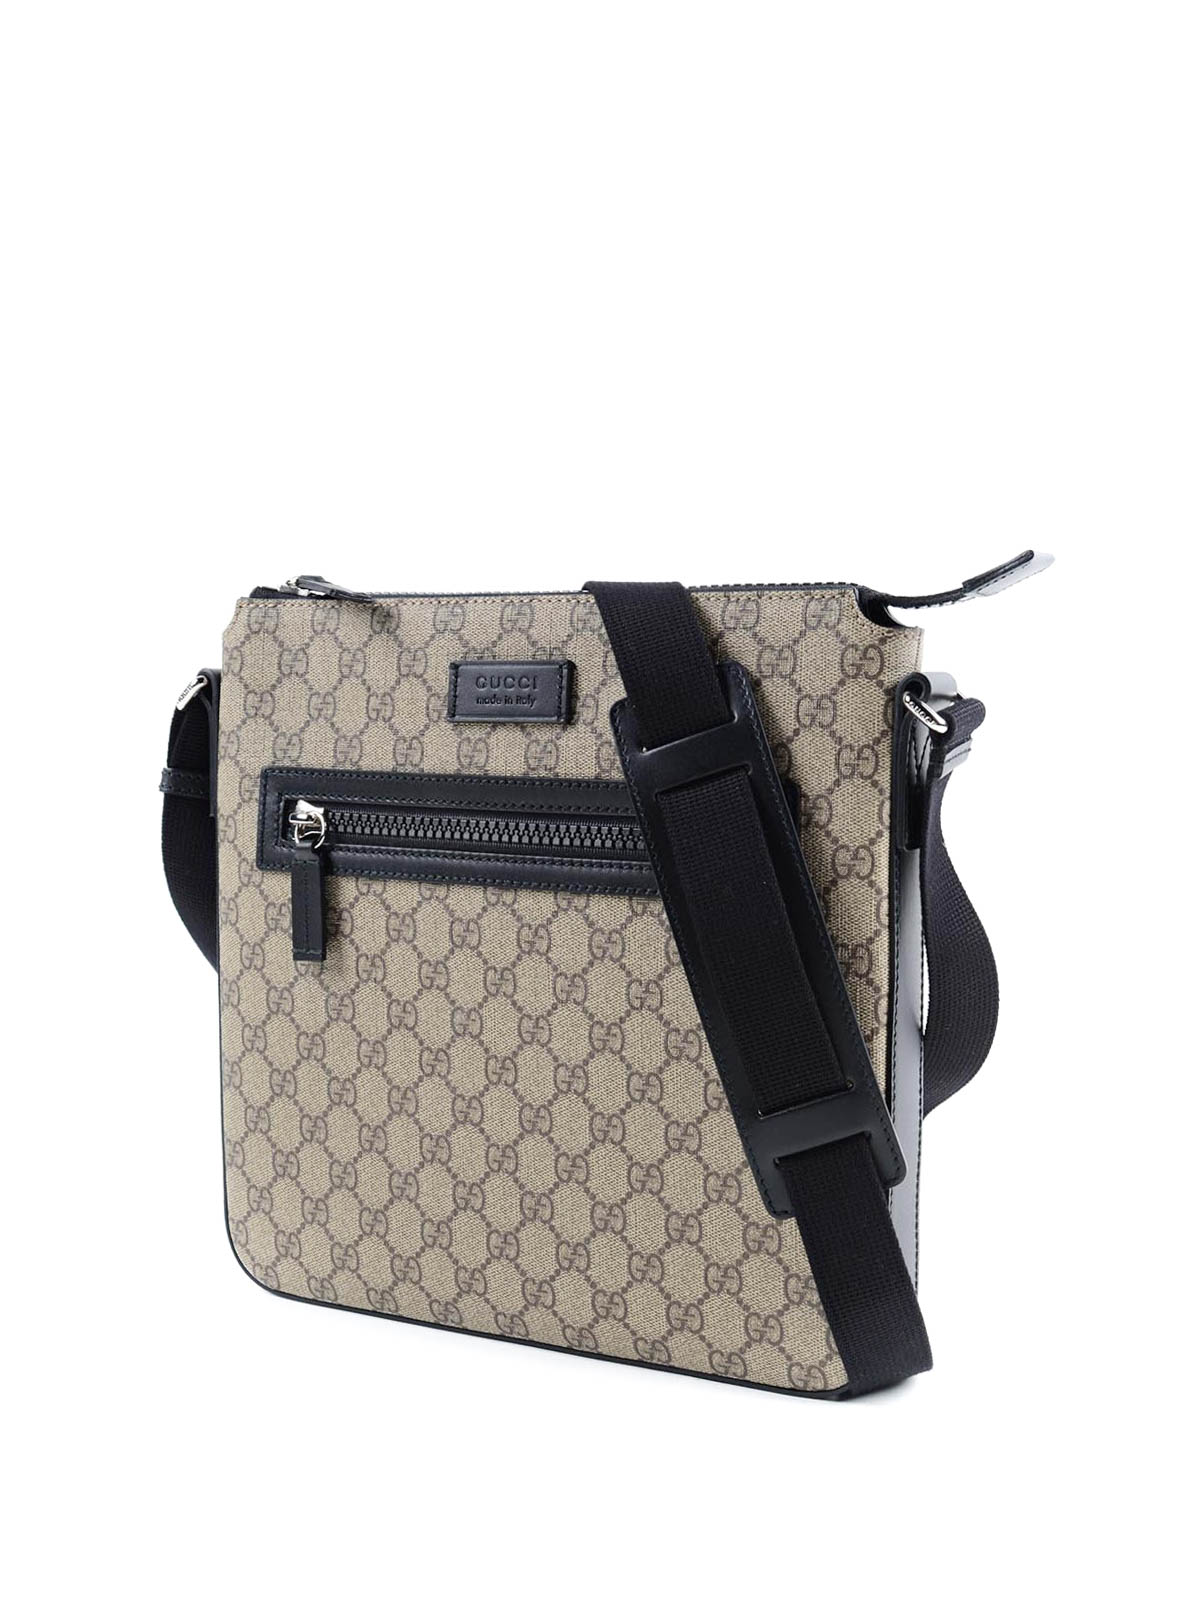 GG Supreme crossbody by Gucci - cross body bags | Shop online at www.bagssaleusa.com/product-category/shoes/